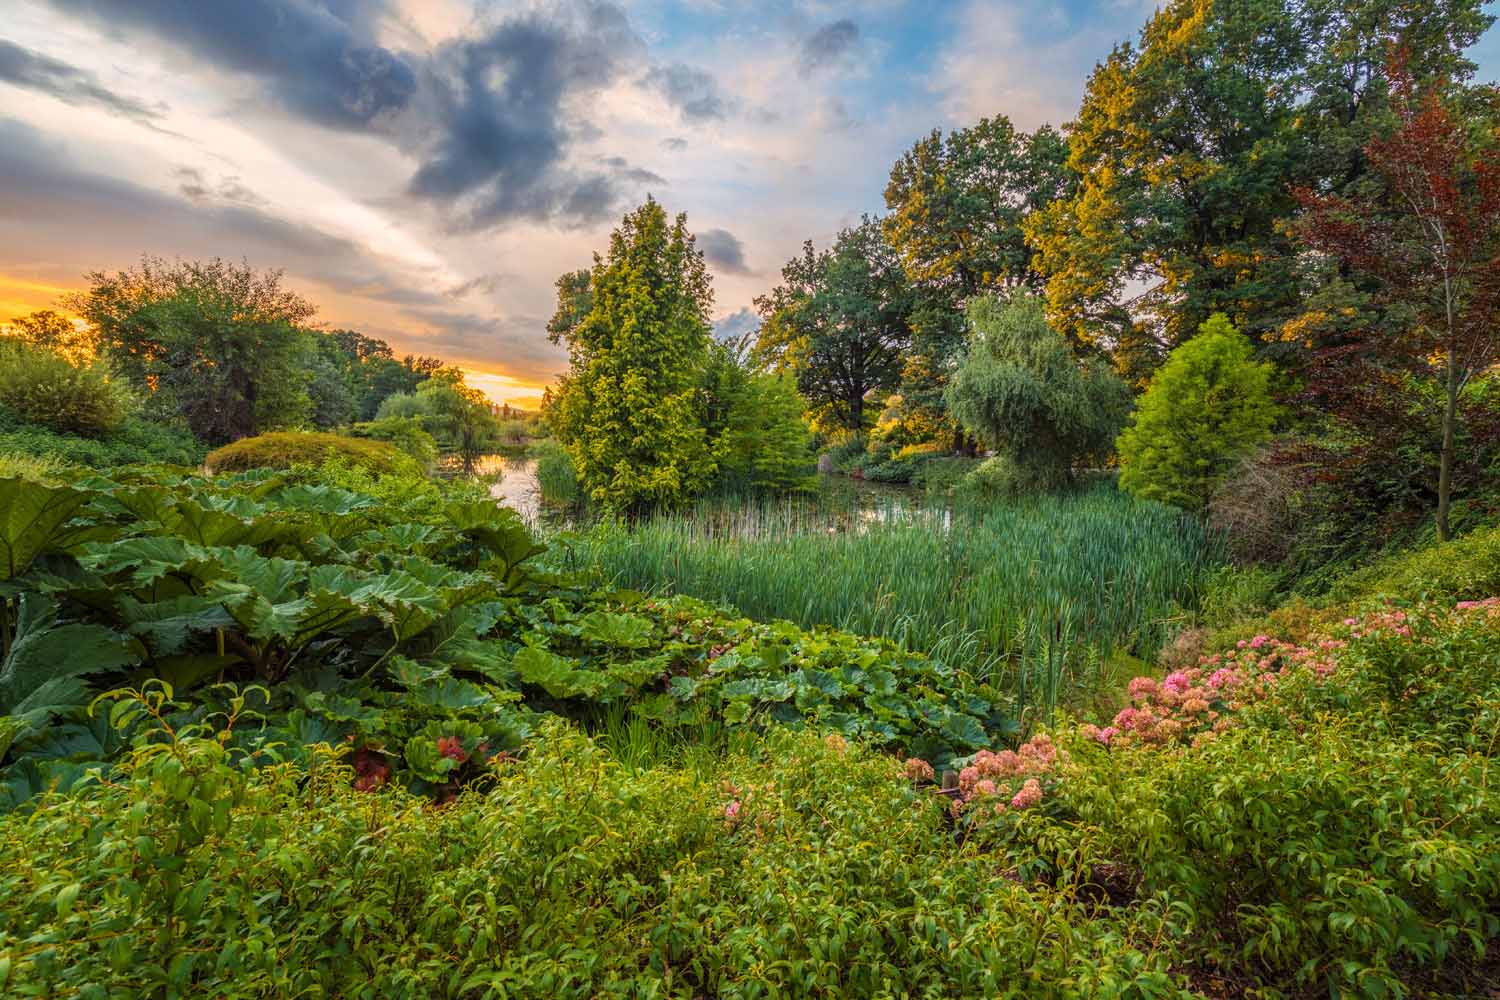 IGPOTY Competition 15 1st place - Beautiful Gardens "Greenery by the Pond"